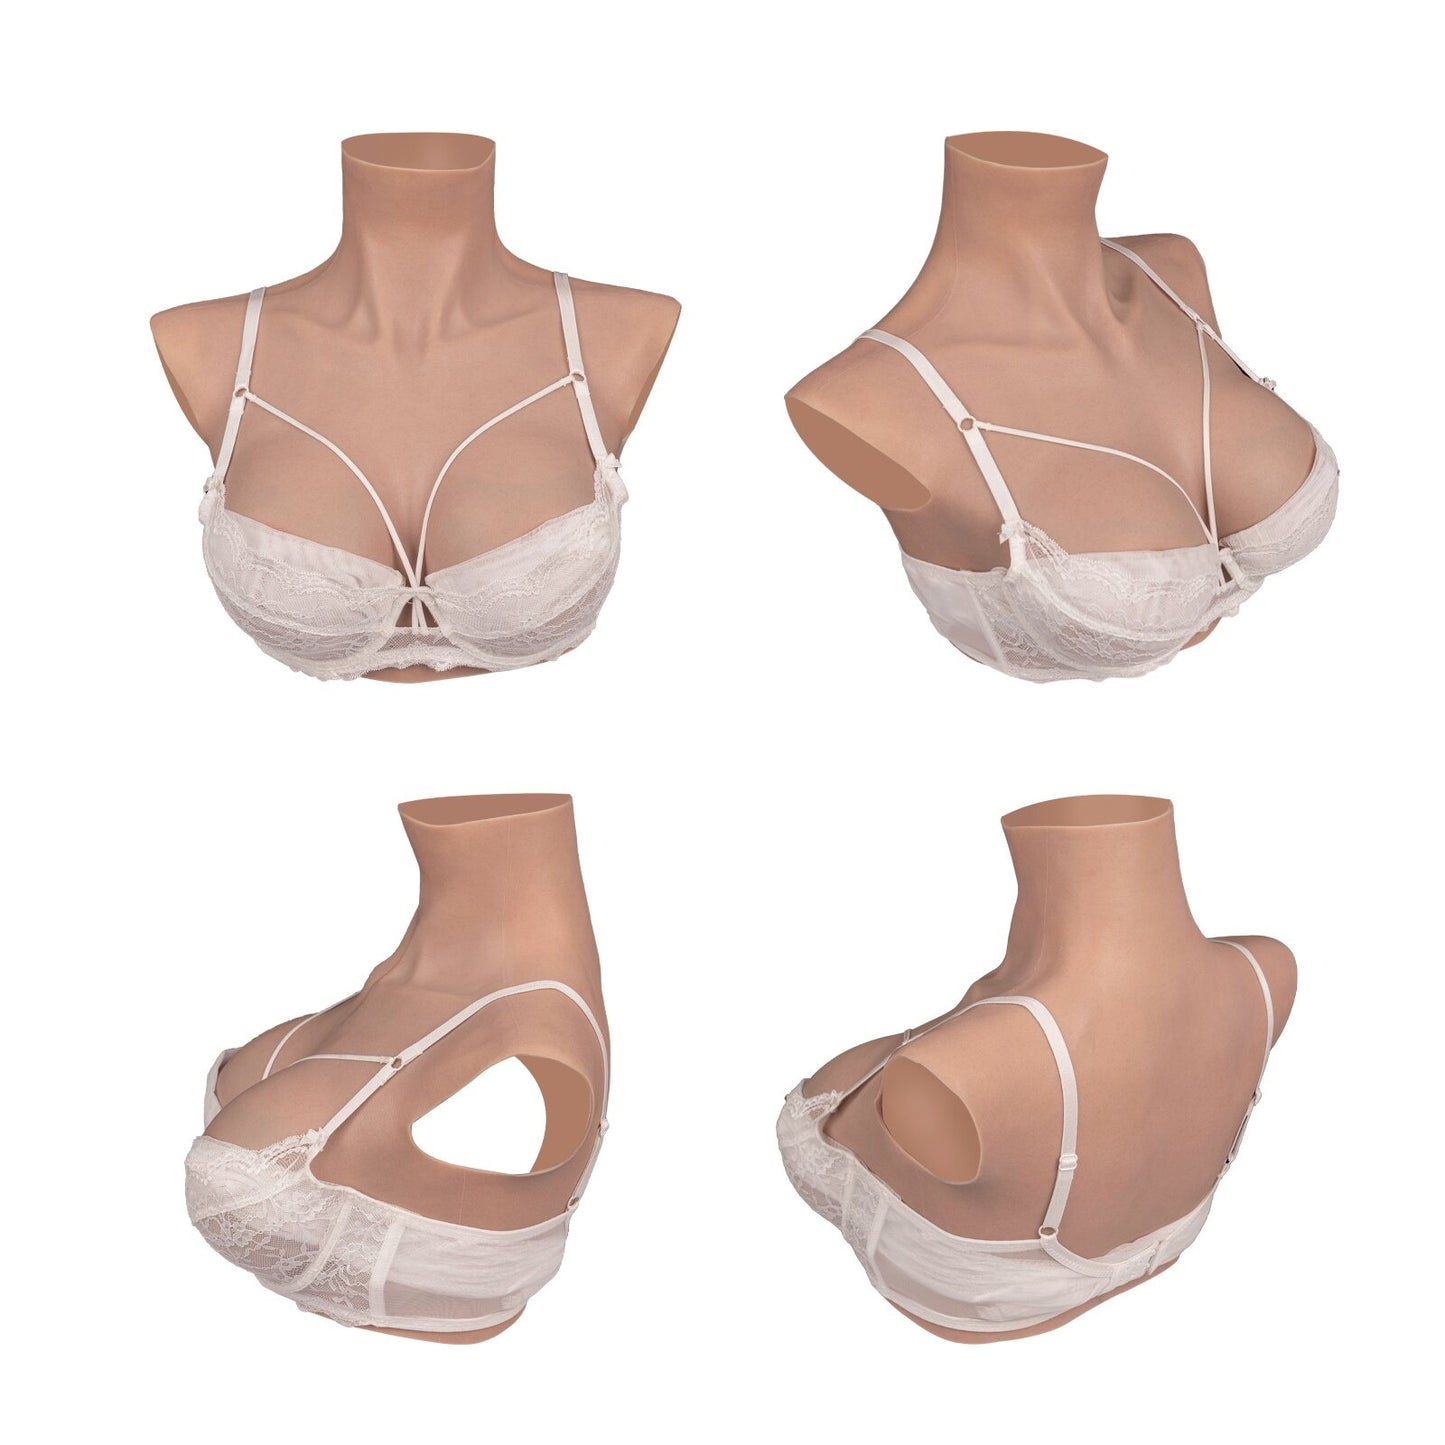 Amie Thyst Silicone Breast Forms